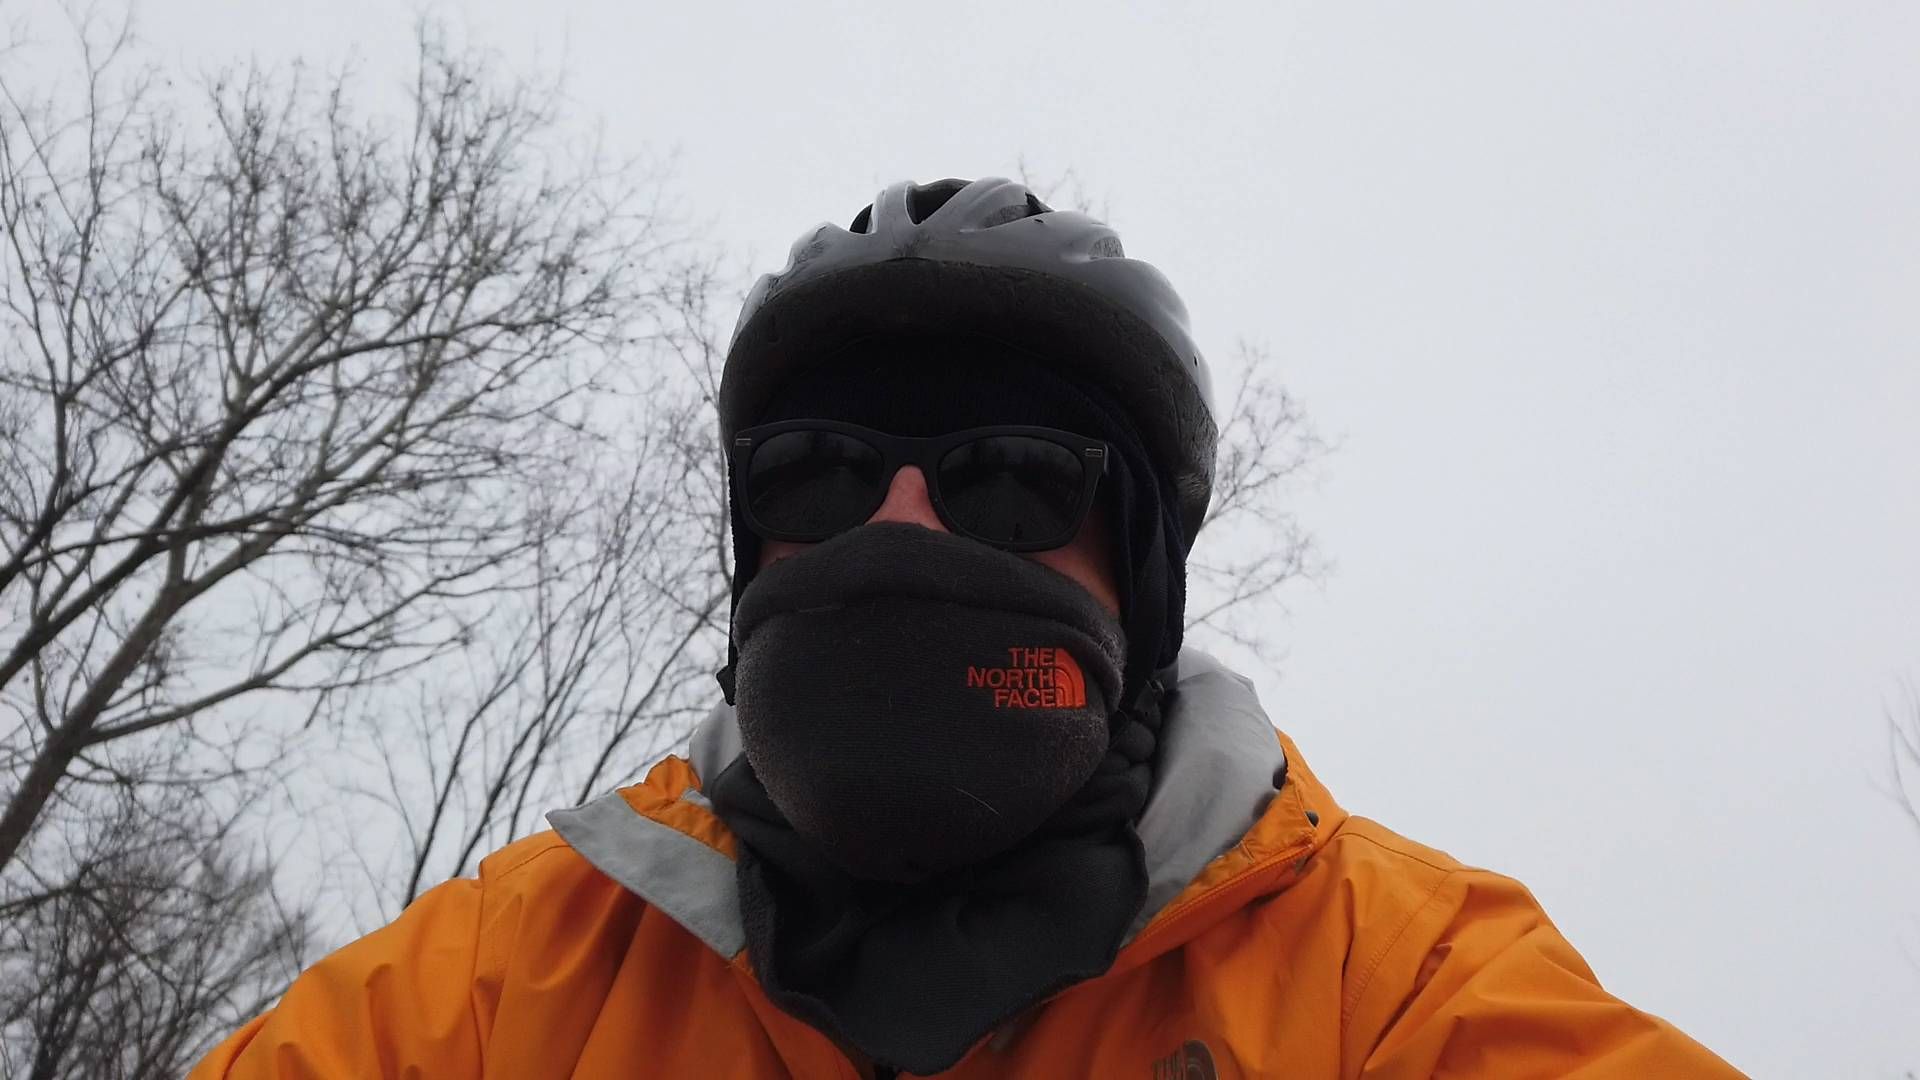 Bike rider with a facemask